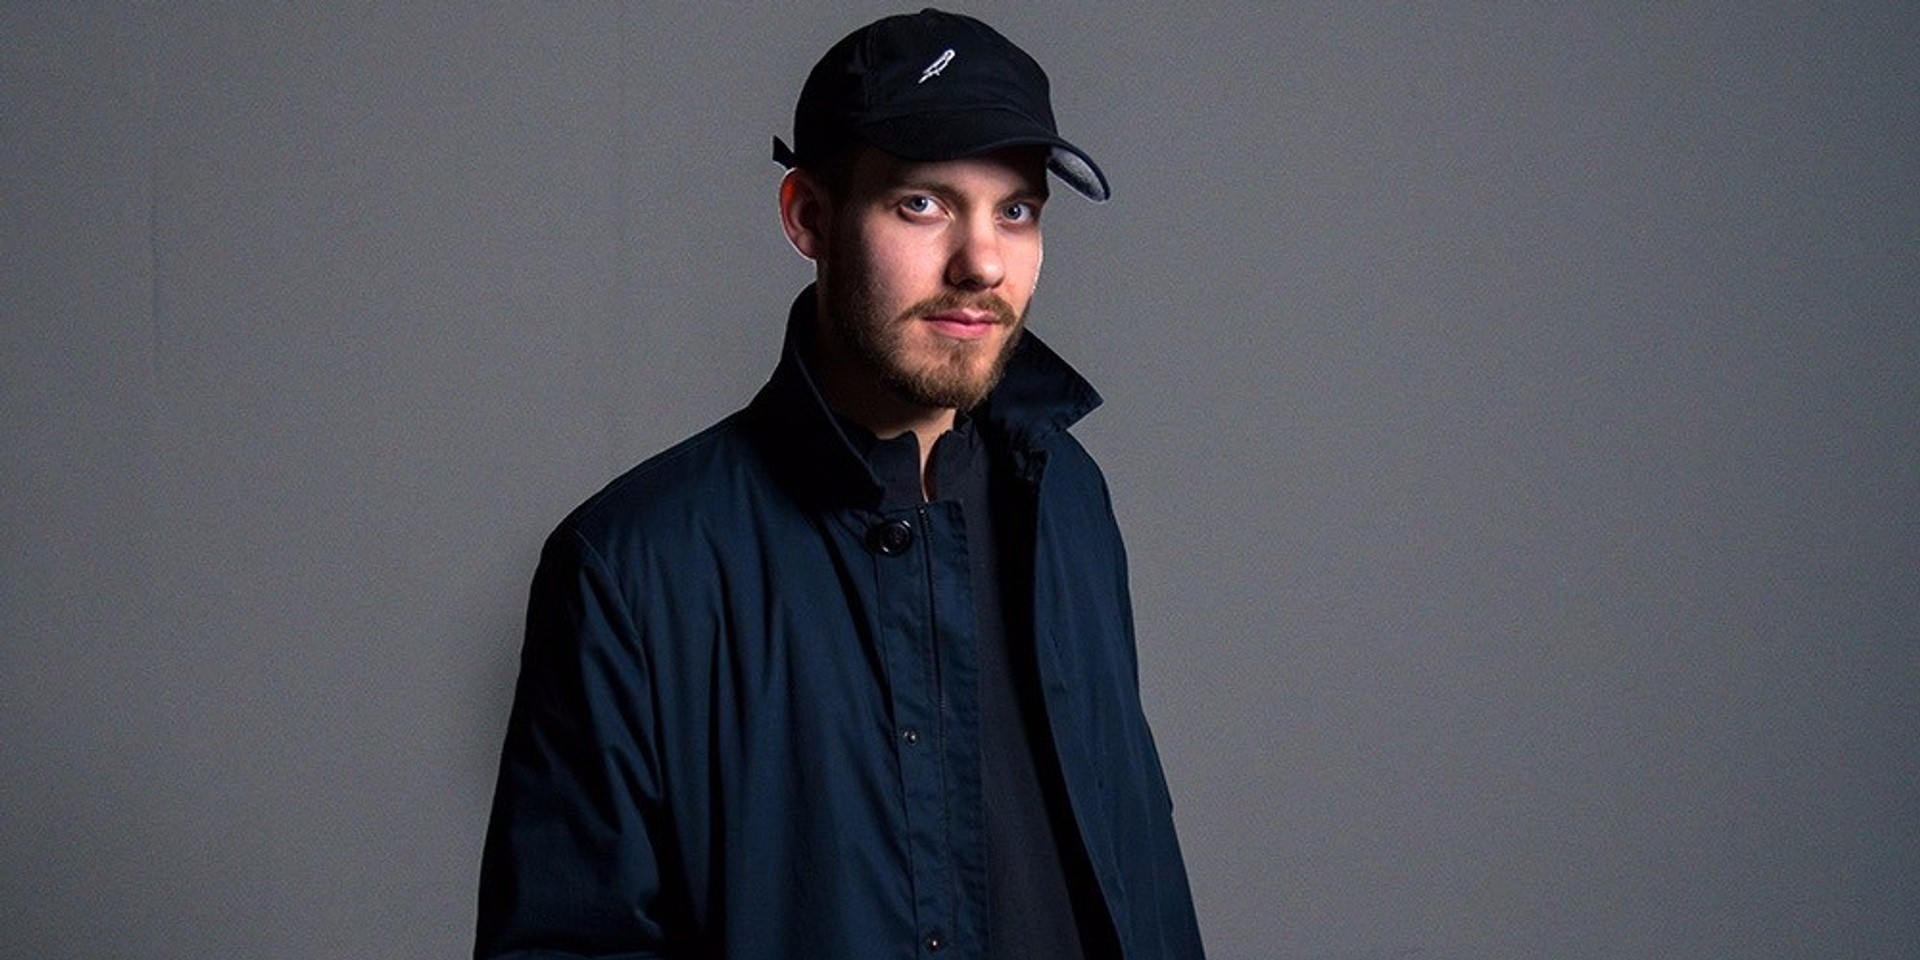 San Holo: On his record label bitbird, "Artists that provoke something and hit you in the feels."